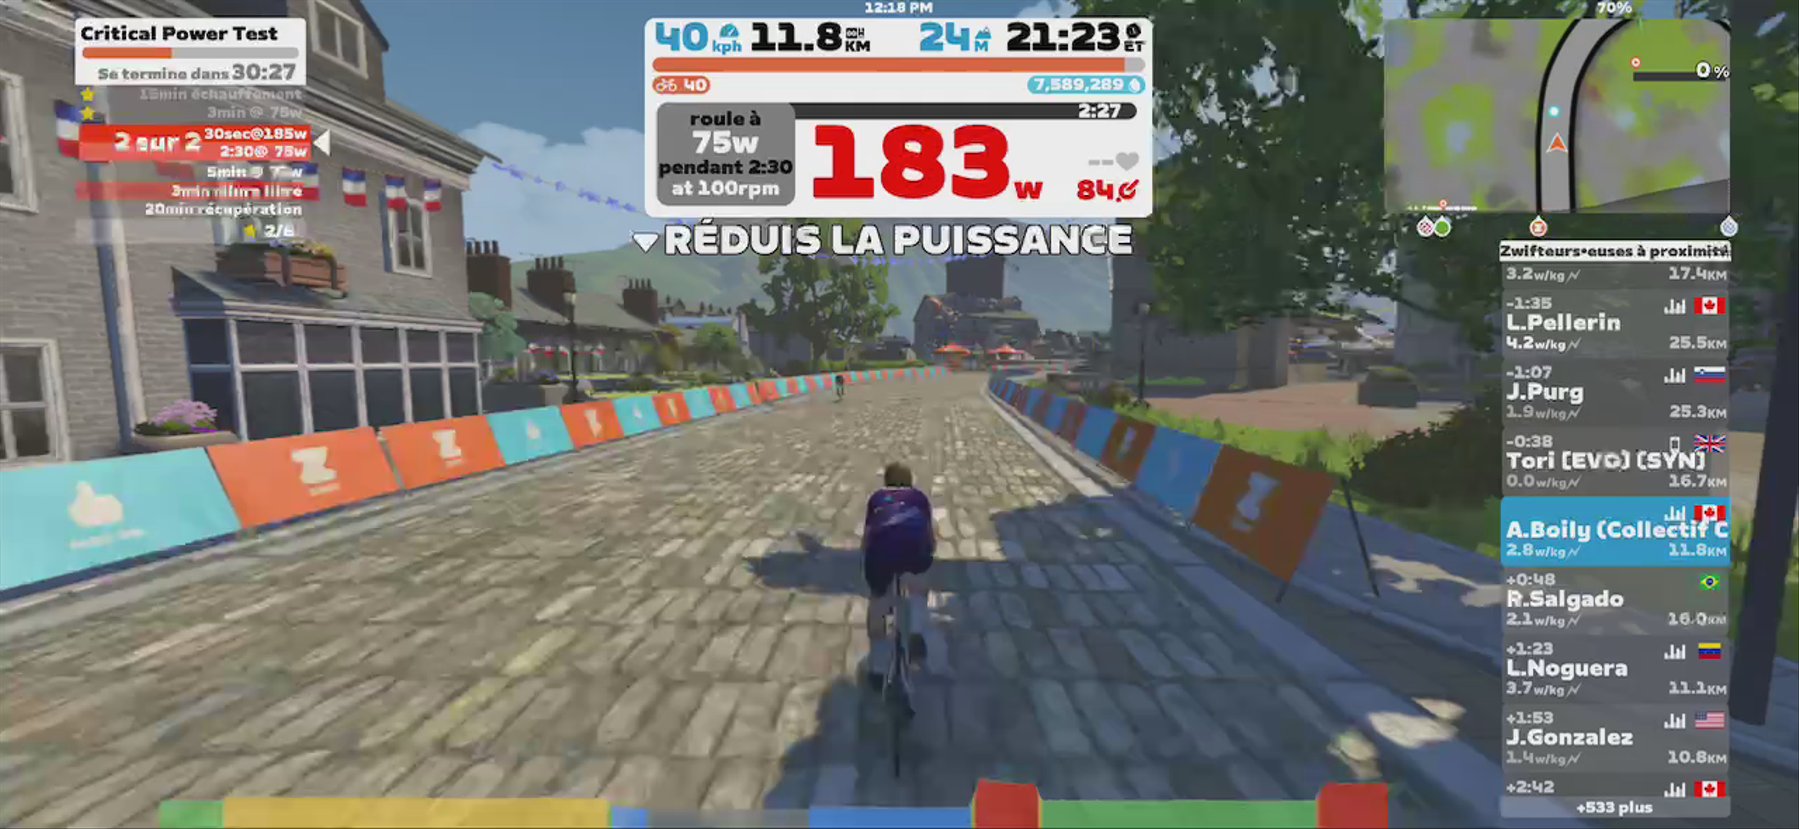 Zwift - Critical Power Test in France